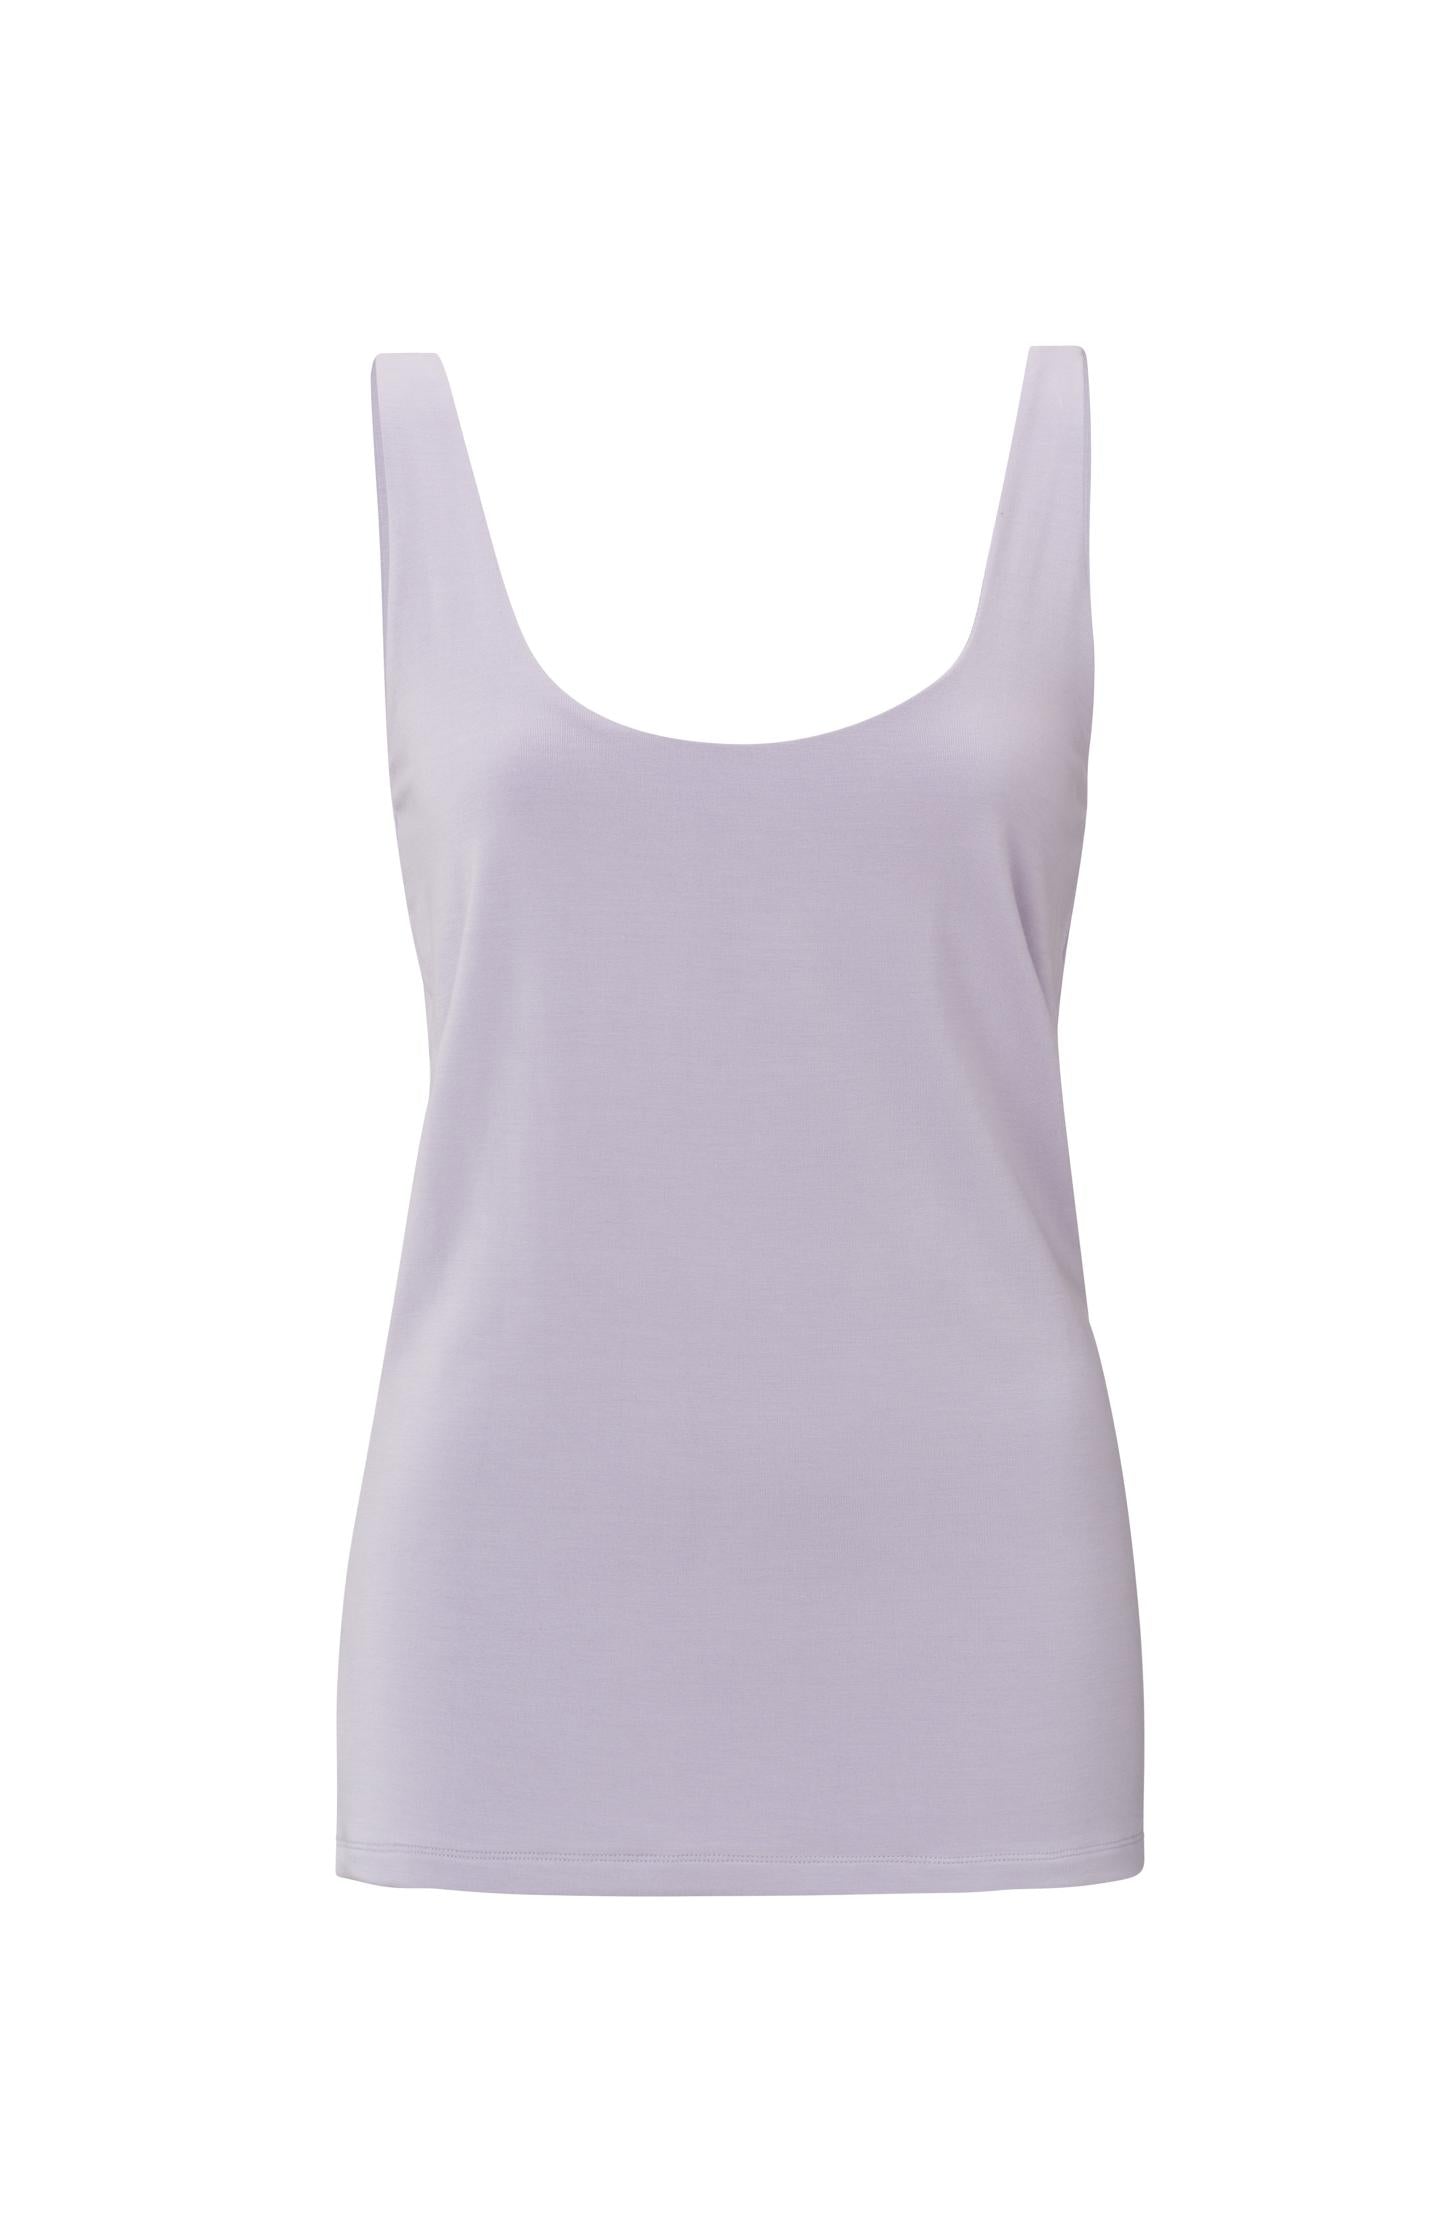 Basic singlet with wide straps and double layered fabric - Type: product